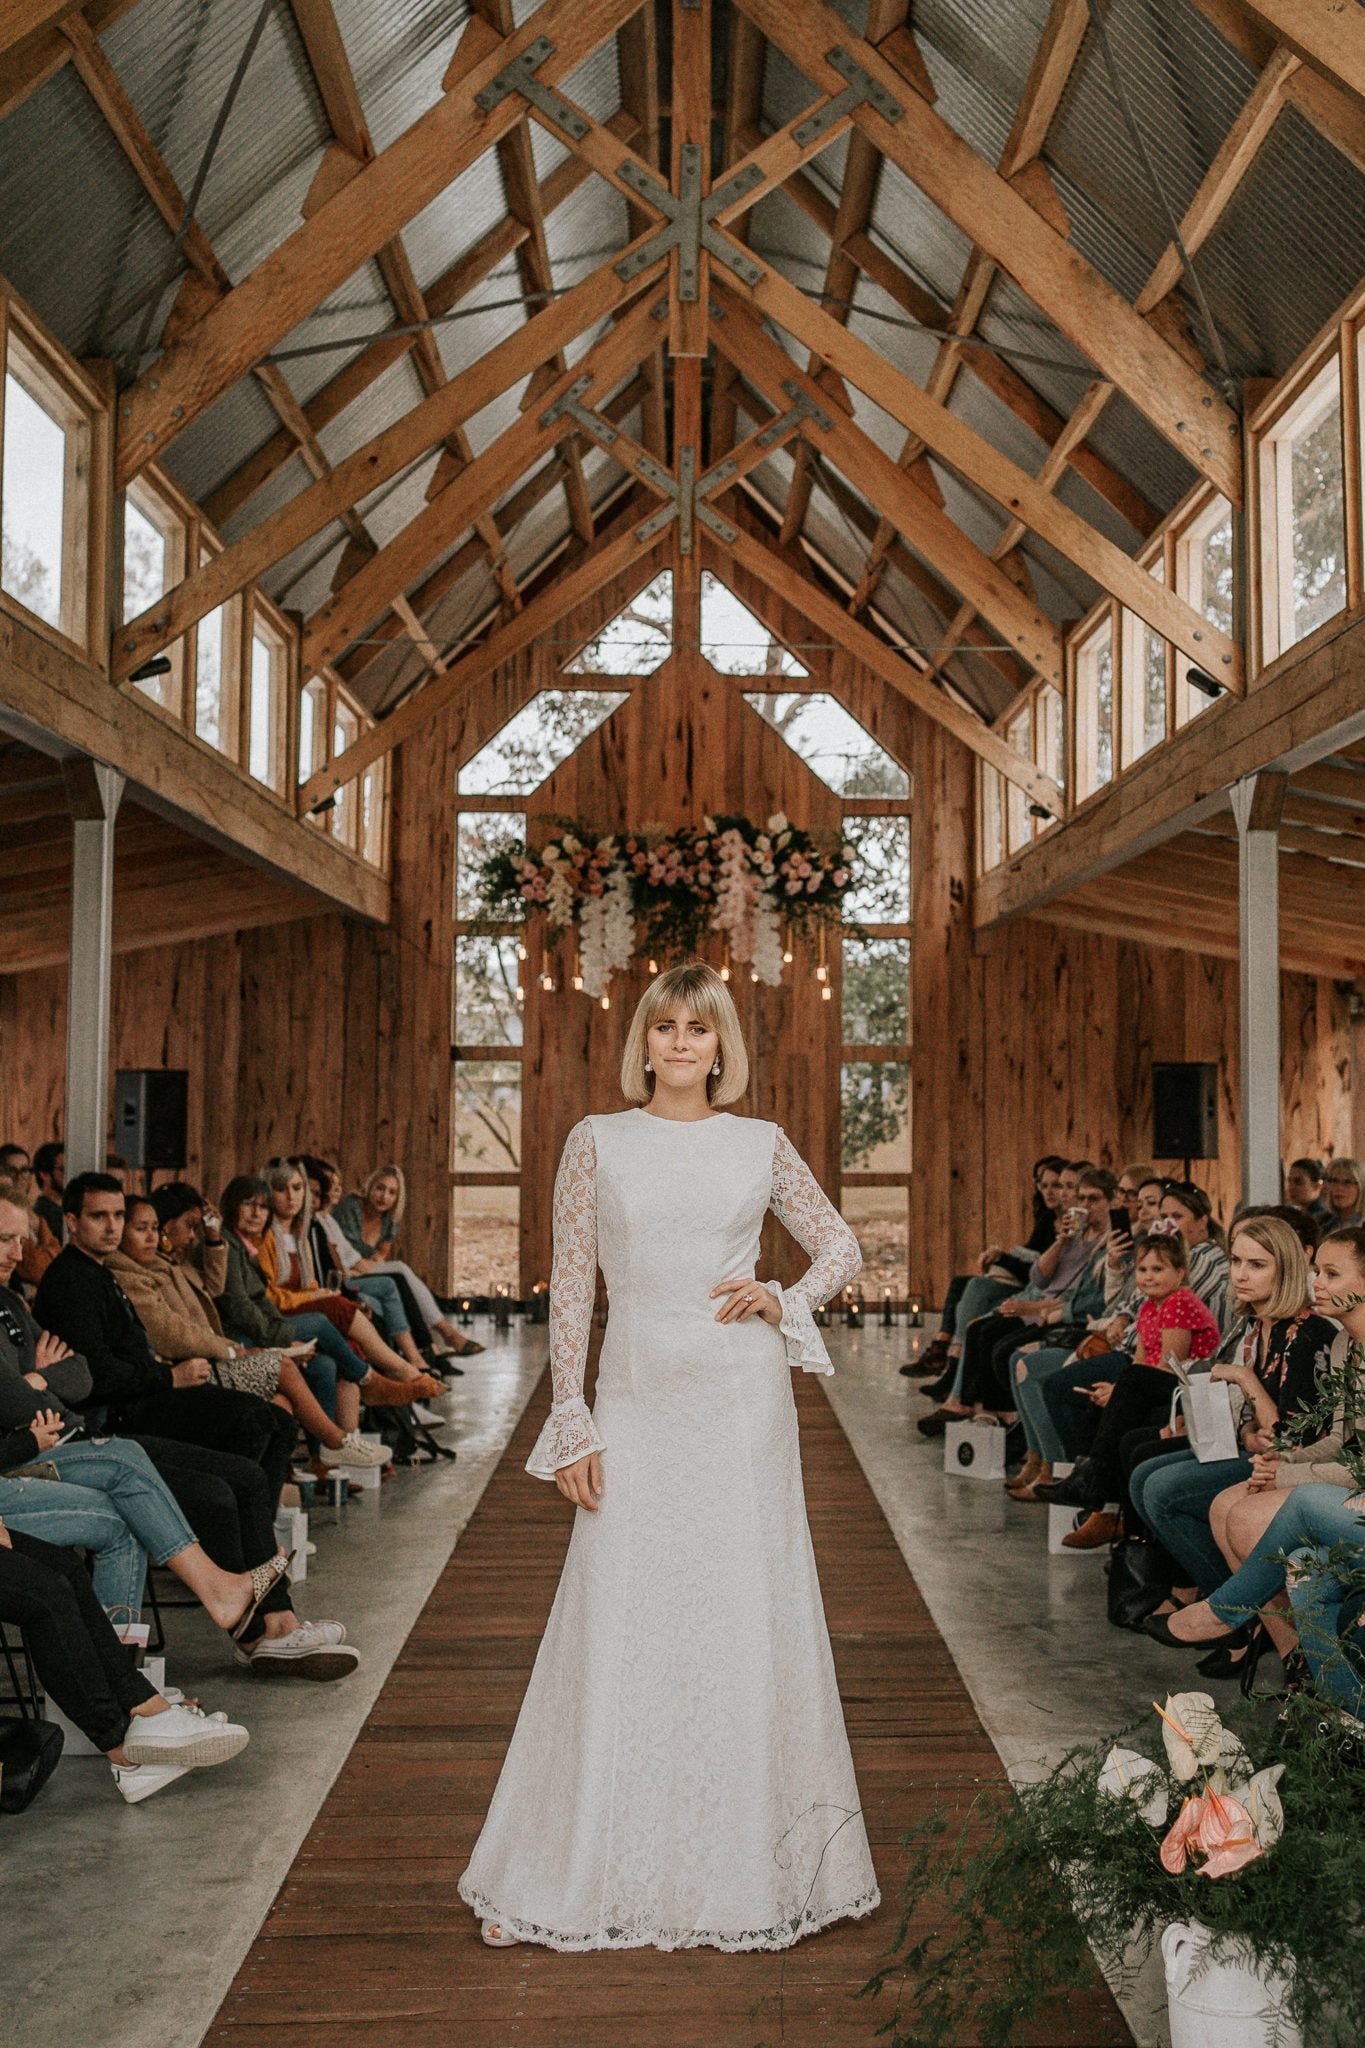 Georgia by Samantha Wynne | Long Sleeve, Lace Wedding Dress with Scooped Back